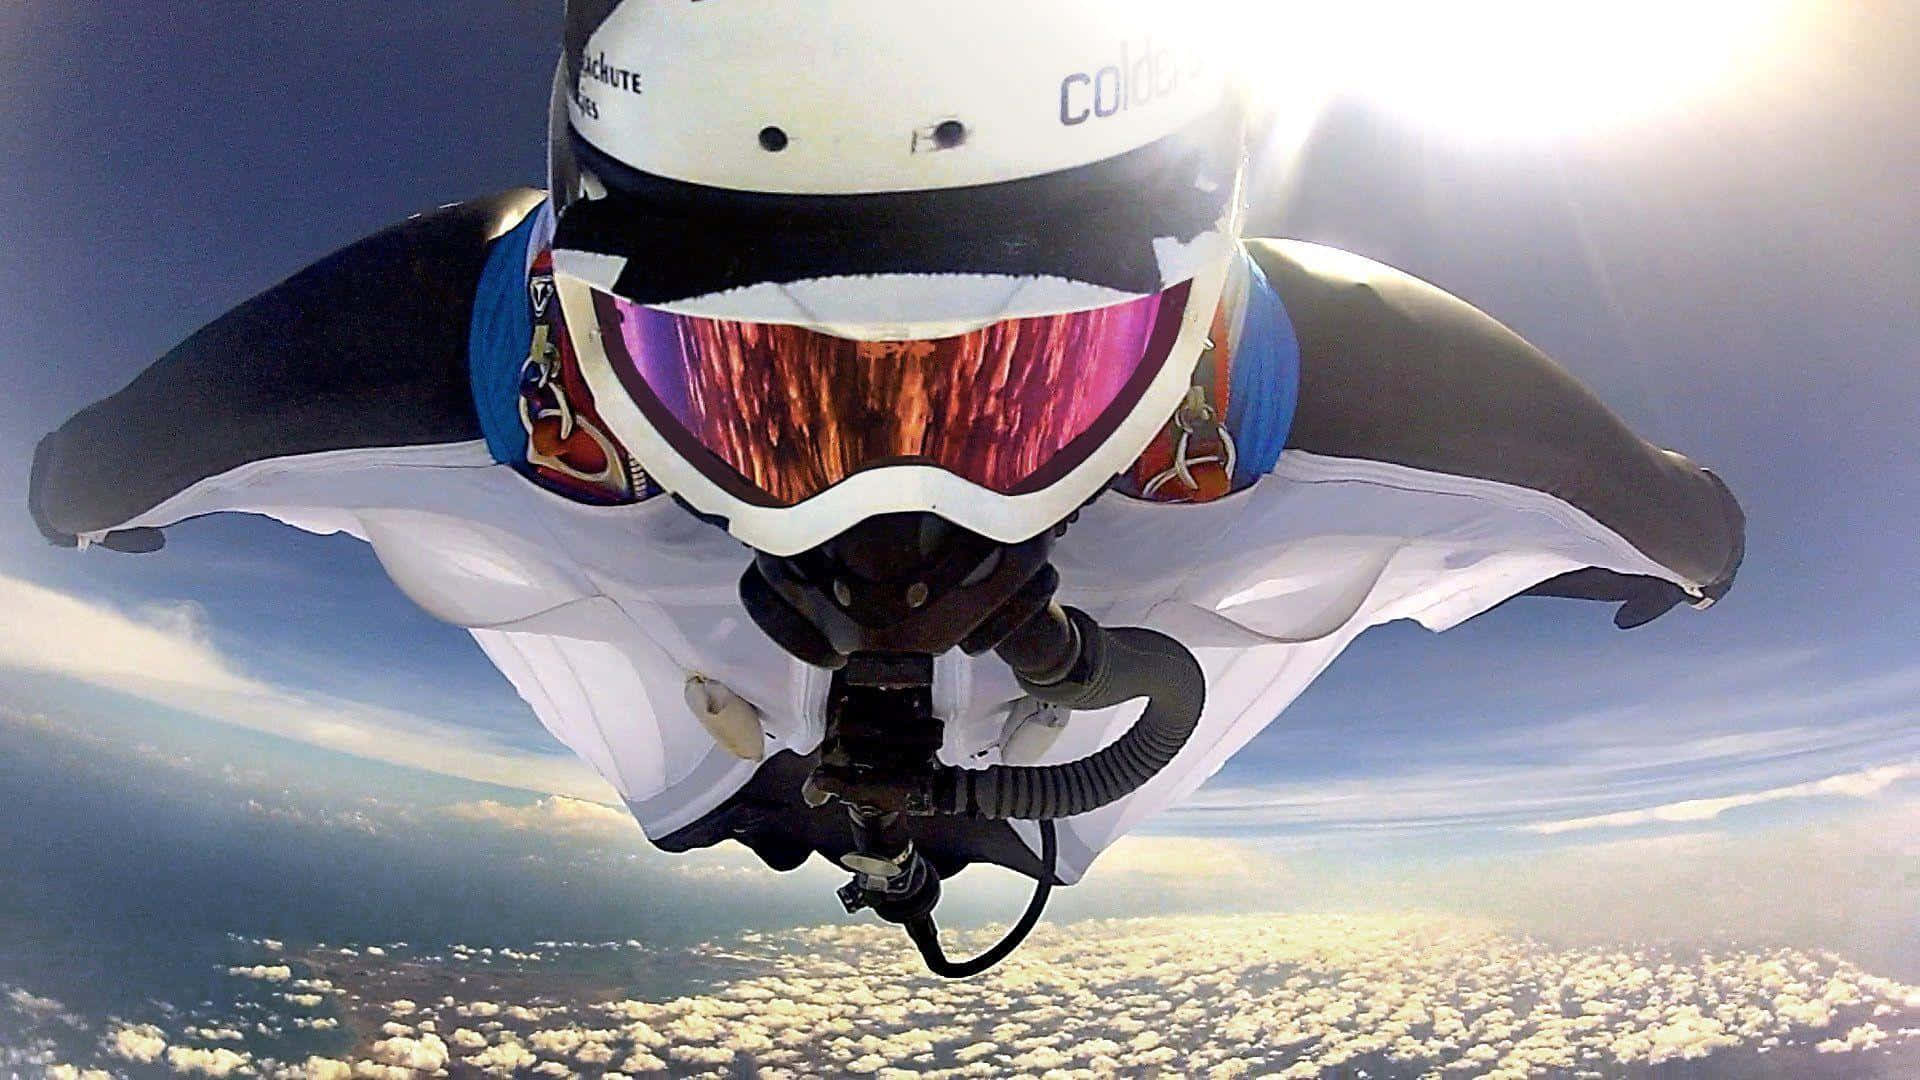 "Experience the freedom of flight with an exciting skydive!"